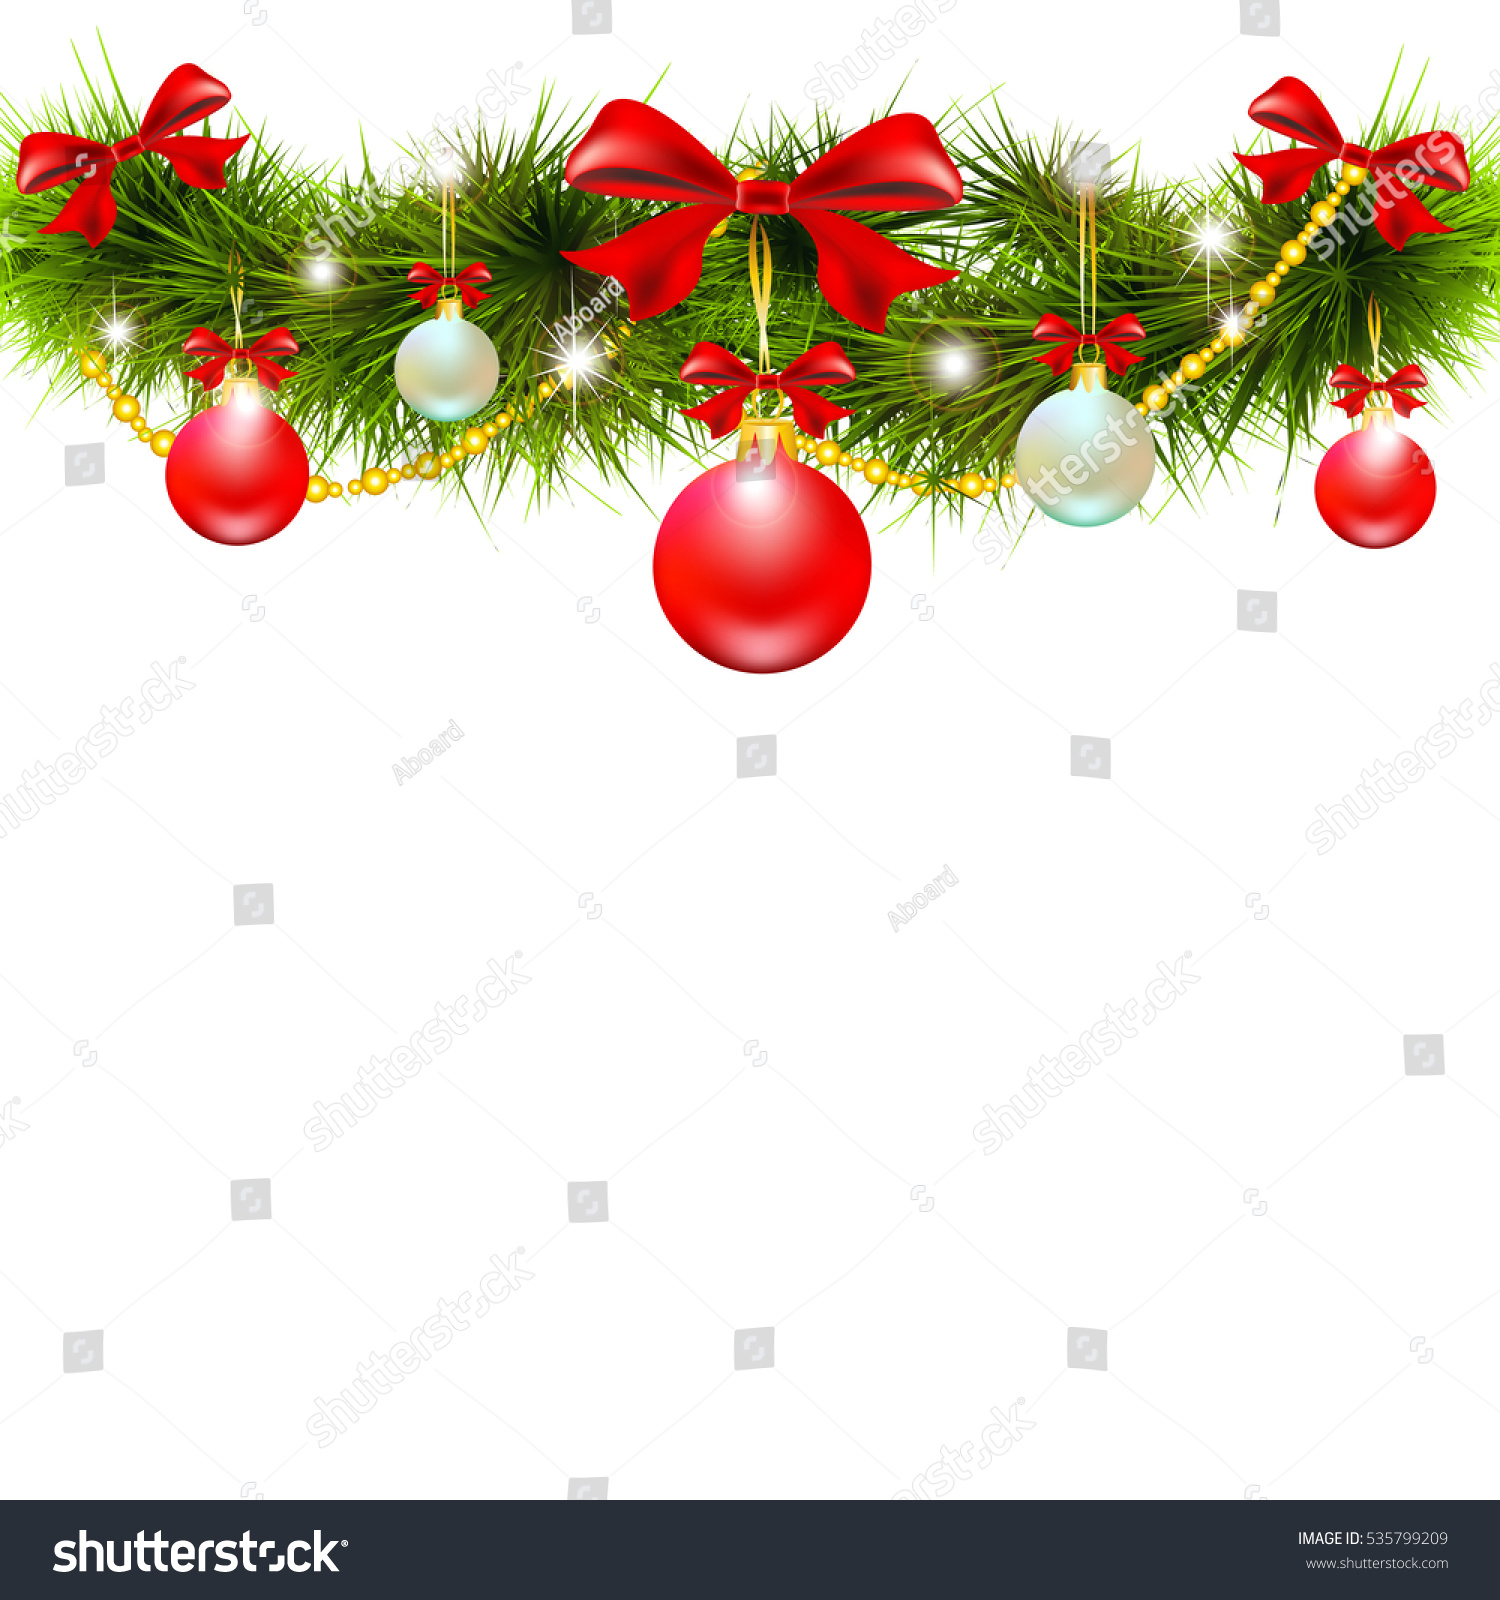 Christmas Garland,On A White Stock Photo 535799209 : Shutterstock